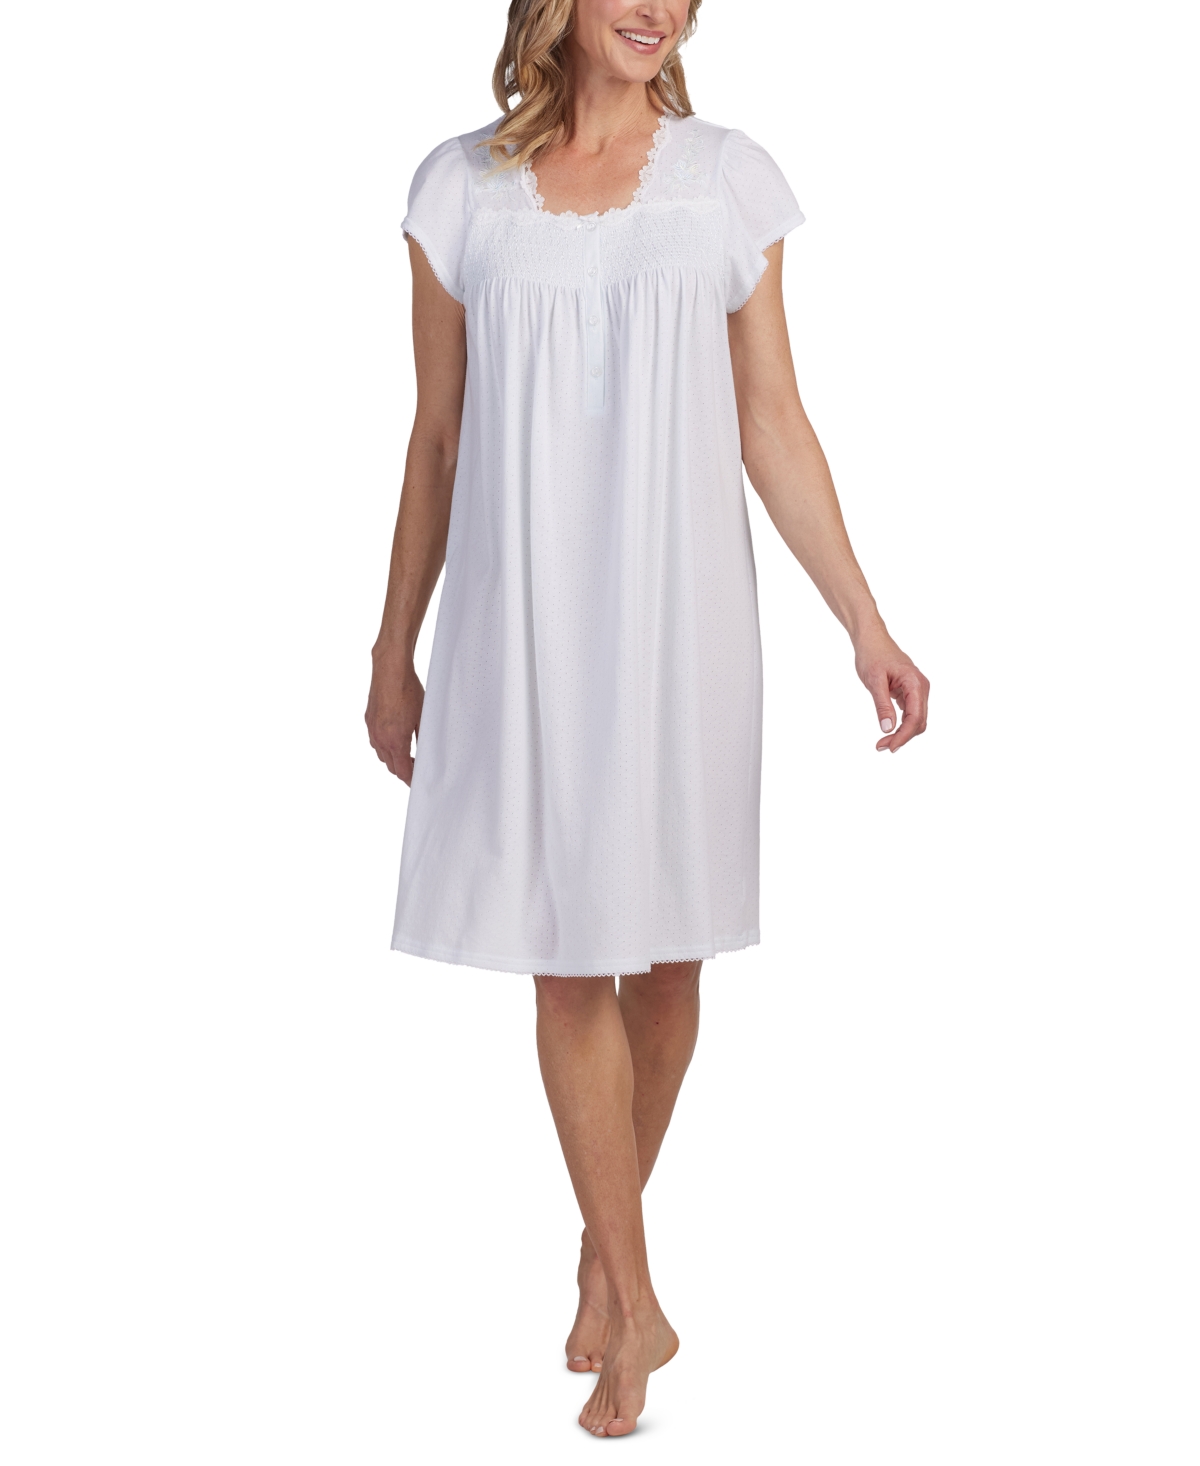 Women's Smocked Lace-Trim Nightgown - Mint